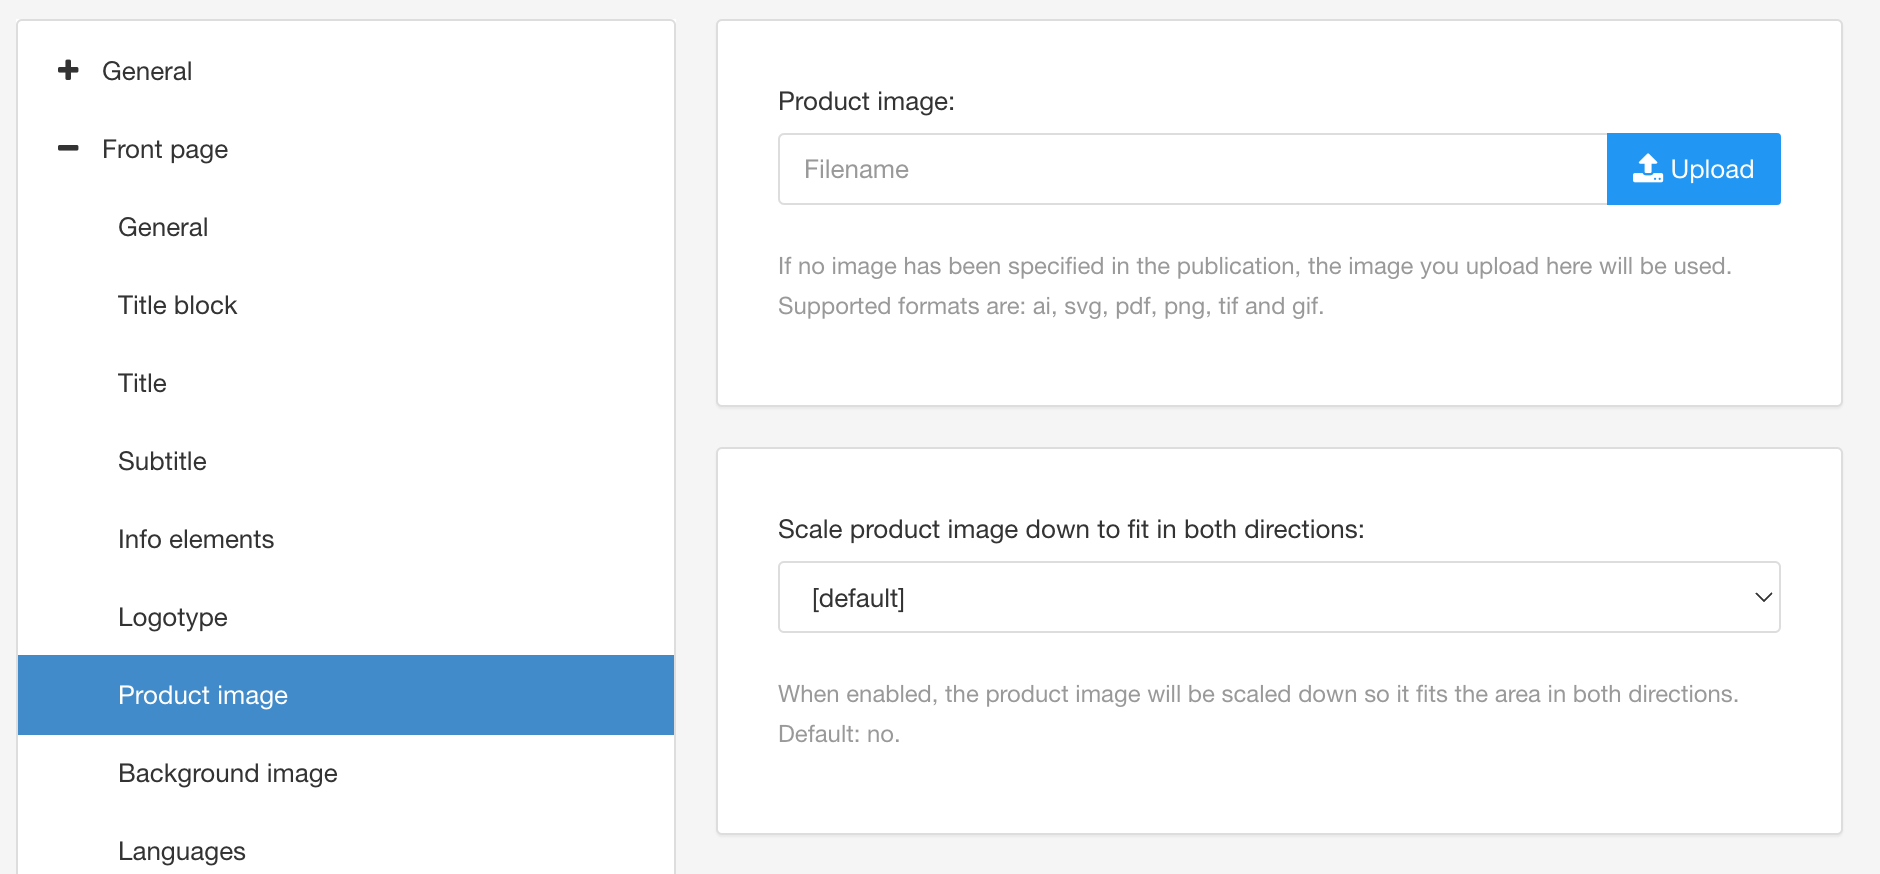 PDF layout. Front page category, product image settings. There is a product image field for uploading an image to the layout.